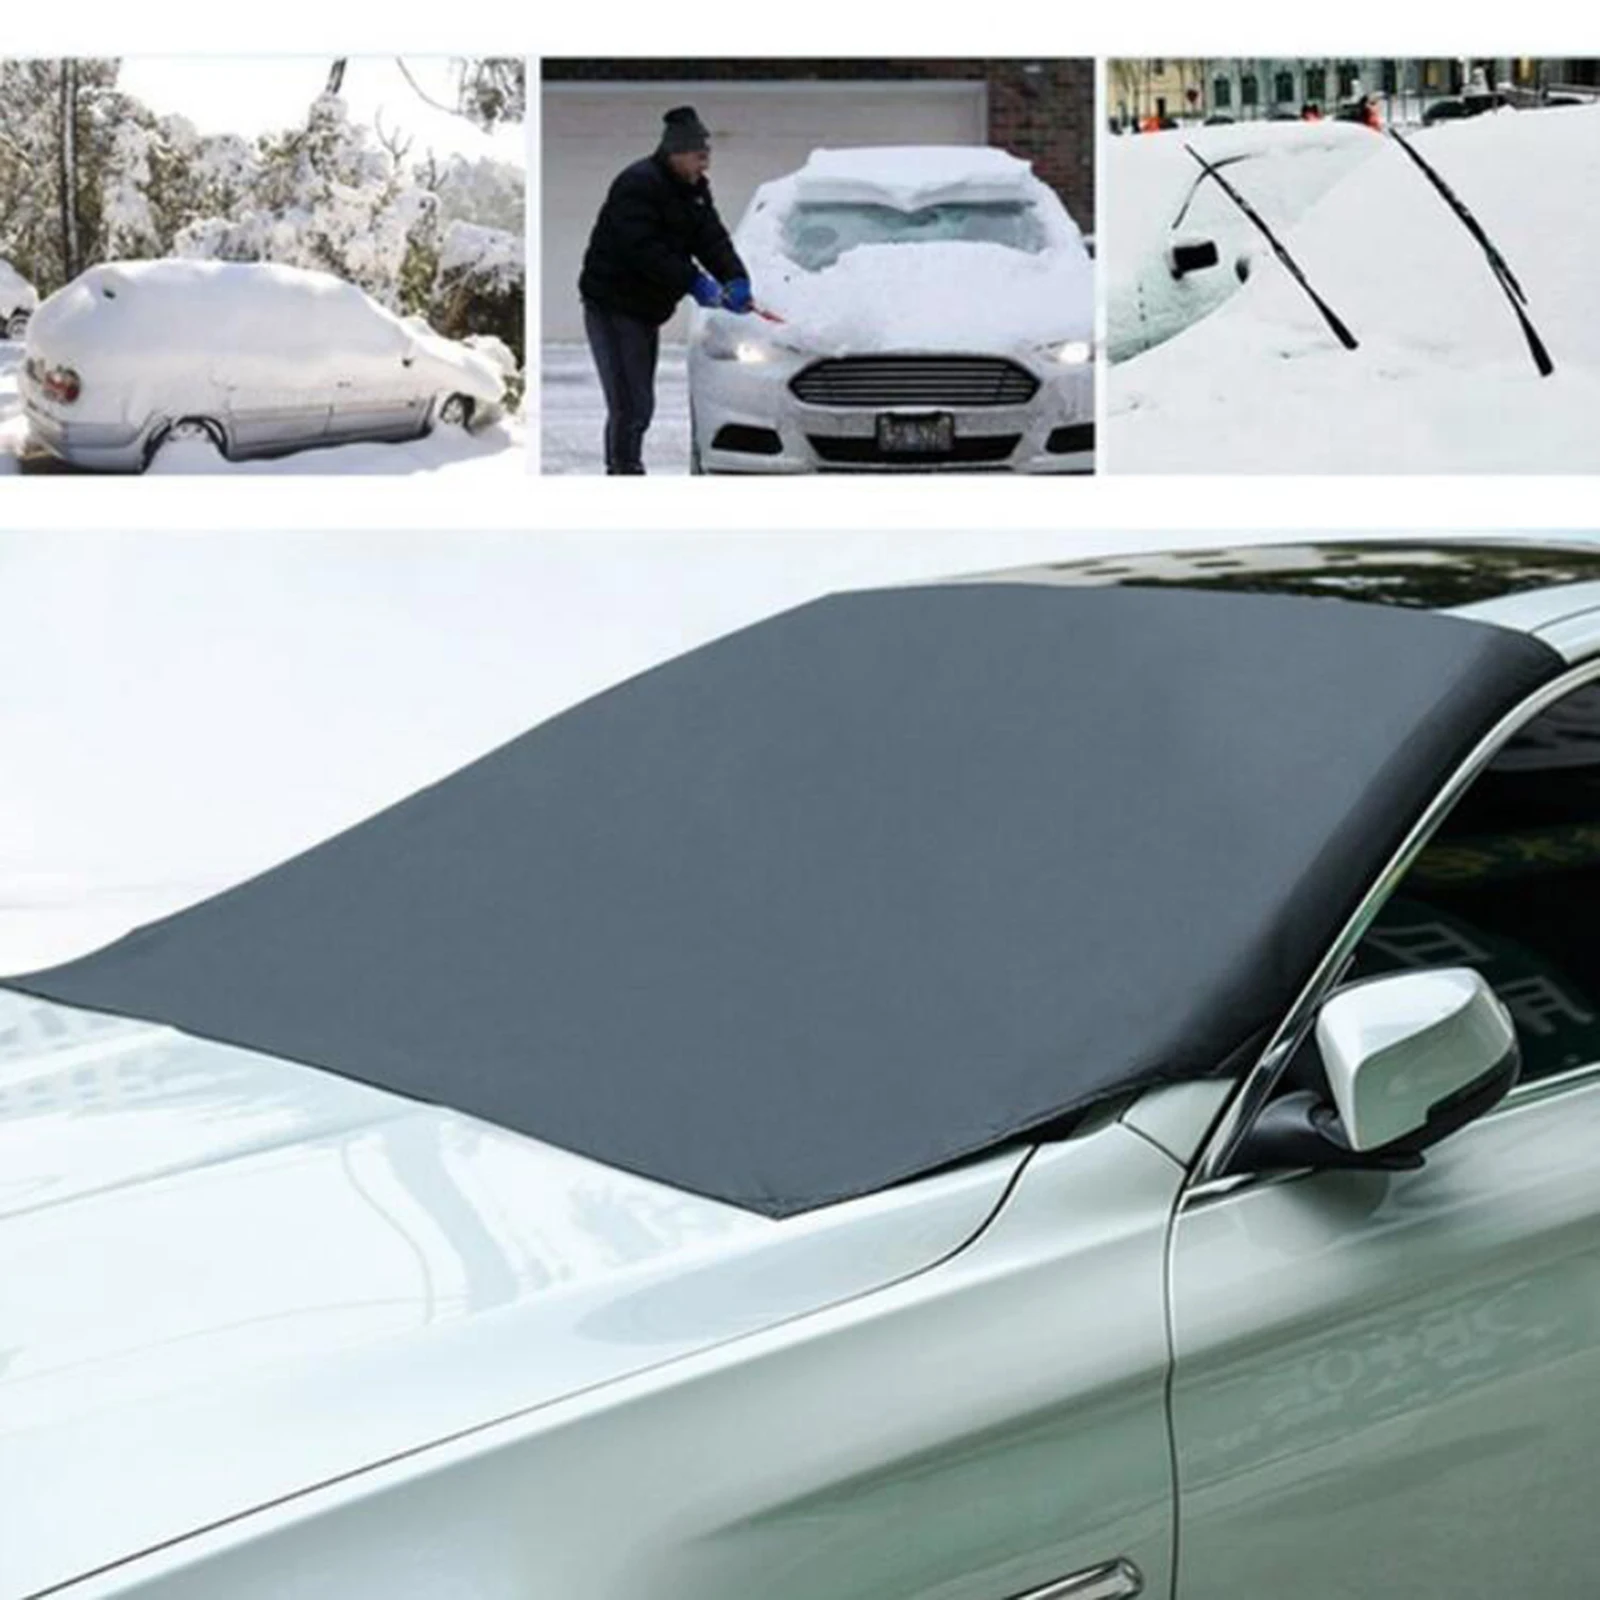 210x125cm Black Car Windshield Cover Snow Sun Shade Waterproof and Portable Winter Protector Windscreen Cover for Truck Car Van